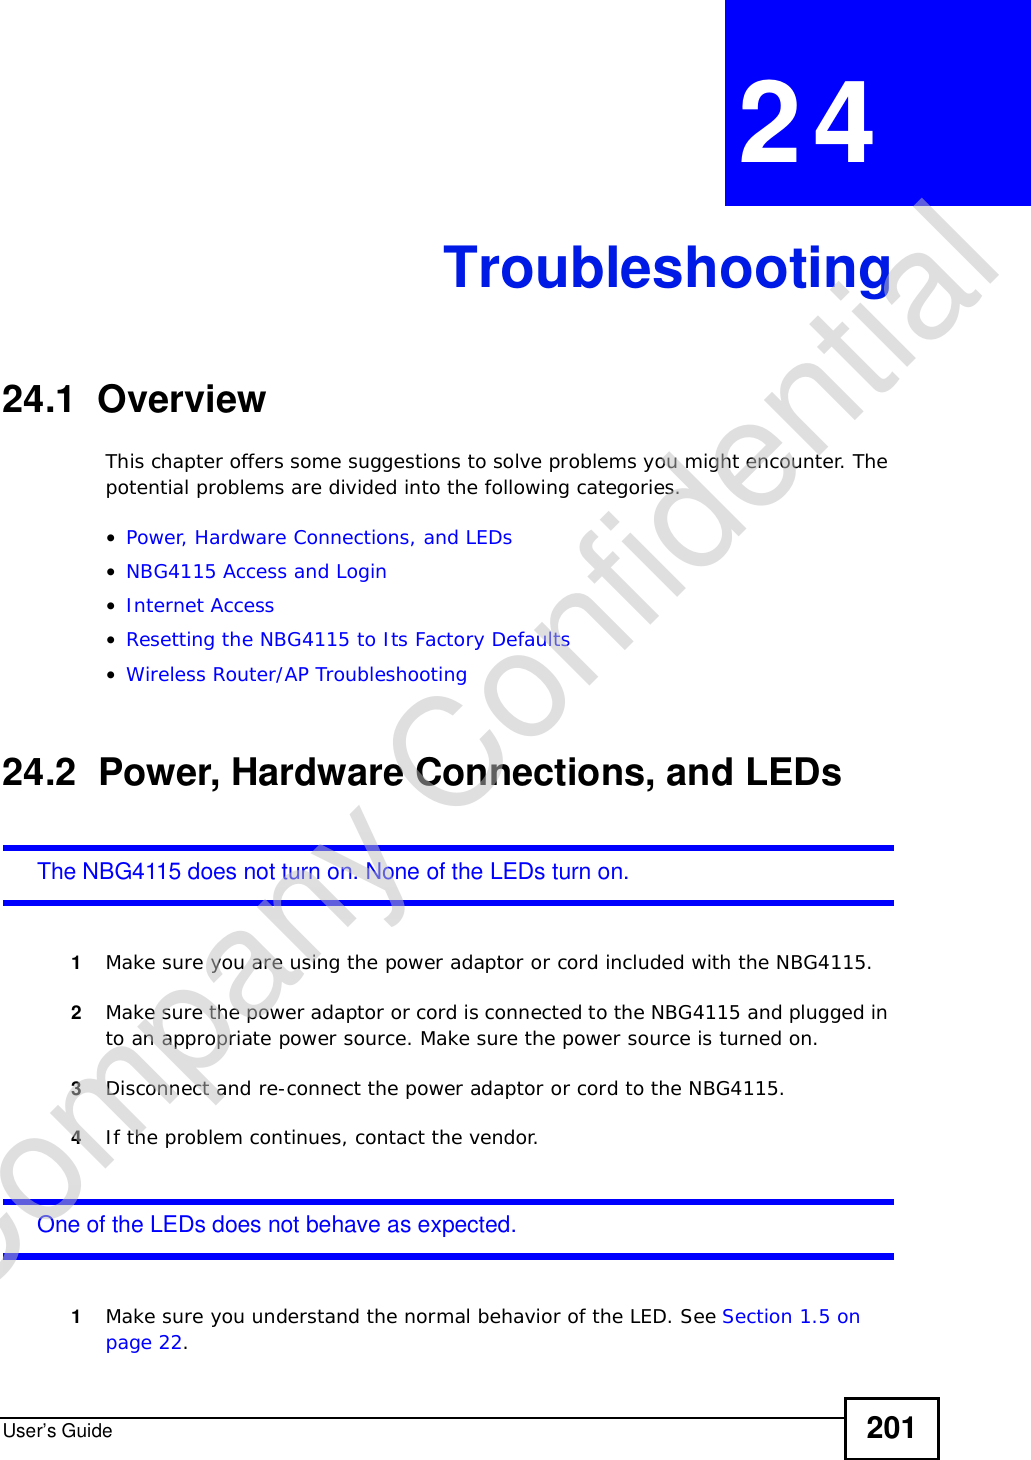 User’s Guide 201CHAPTER 24Troubleshooting24.1  OverviewThis chapter offers some suggestions to solve problems you might encounter. The potential problems are divided into the following categories. •Power, Hardware Connections, and LEDs•NBG4115 Access and Login•Internet Access•Resetting the NBG4115 to Its Factory Defaults•Wireless Router/AP Troubleshooting24.2  Power, Hardware Connections, and LEDsThe NBG4115 does not turn on. None of the LEDs turn on.1Make sure you are using the power adaptor or cord included with the NBG4115.2Make sure the power adaptor or cord is connected to the NBG4115 and plugged in to an appropriate power source. Make sure the power source is turned on.3Disconnect and re-connect the power adaptor or cord to the NBG4115.4If the problem continues, contact the vendor.One of the LEDs does not behave as expected.1Make sure you understand the normal behavior of the LED. See Section 1.5 on page 22.Company Confidential